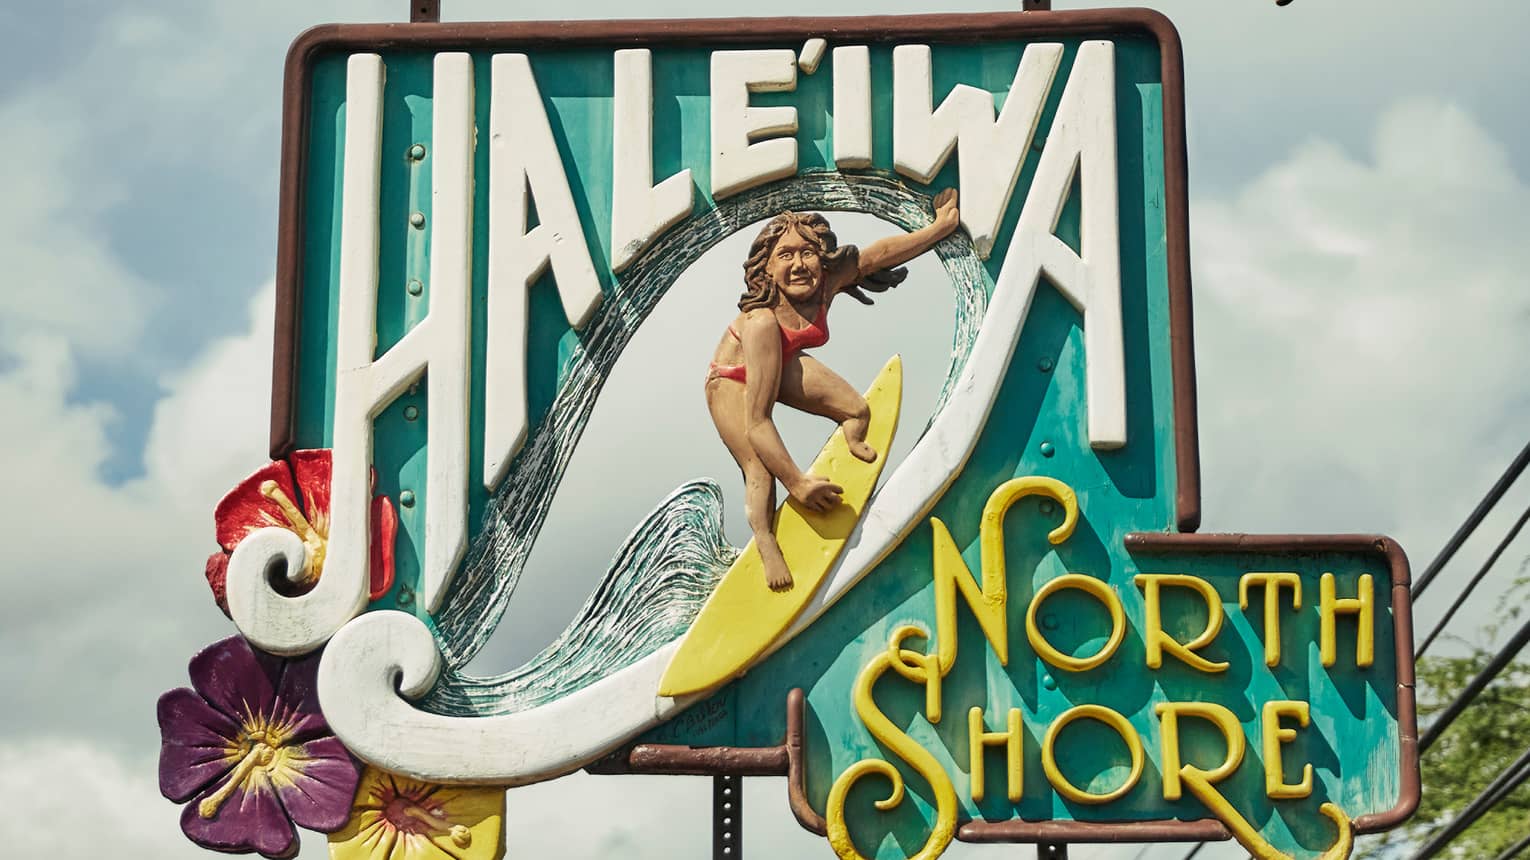 Colourful wood sign reading Haleiwa North Shore with carving of woman on surfboard